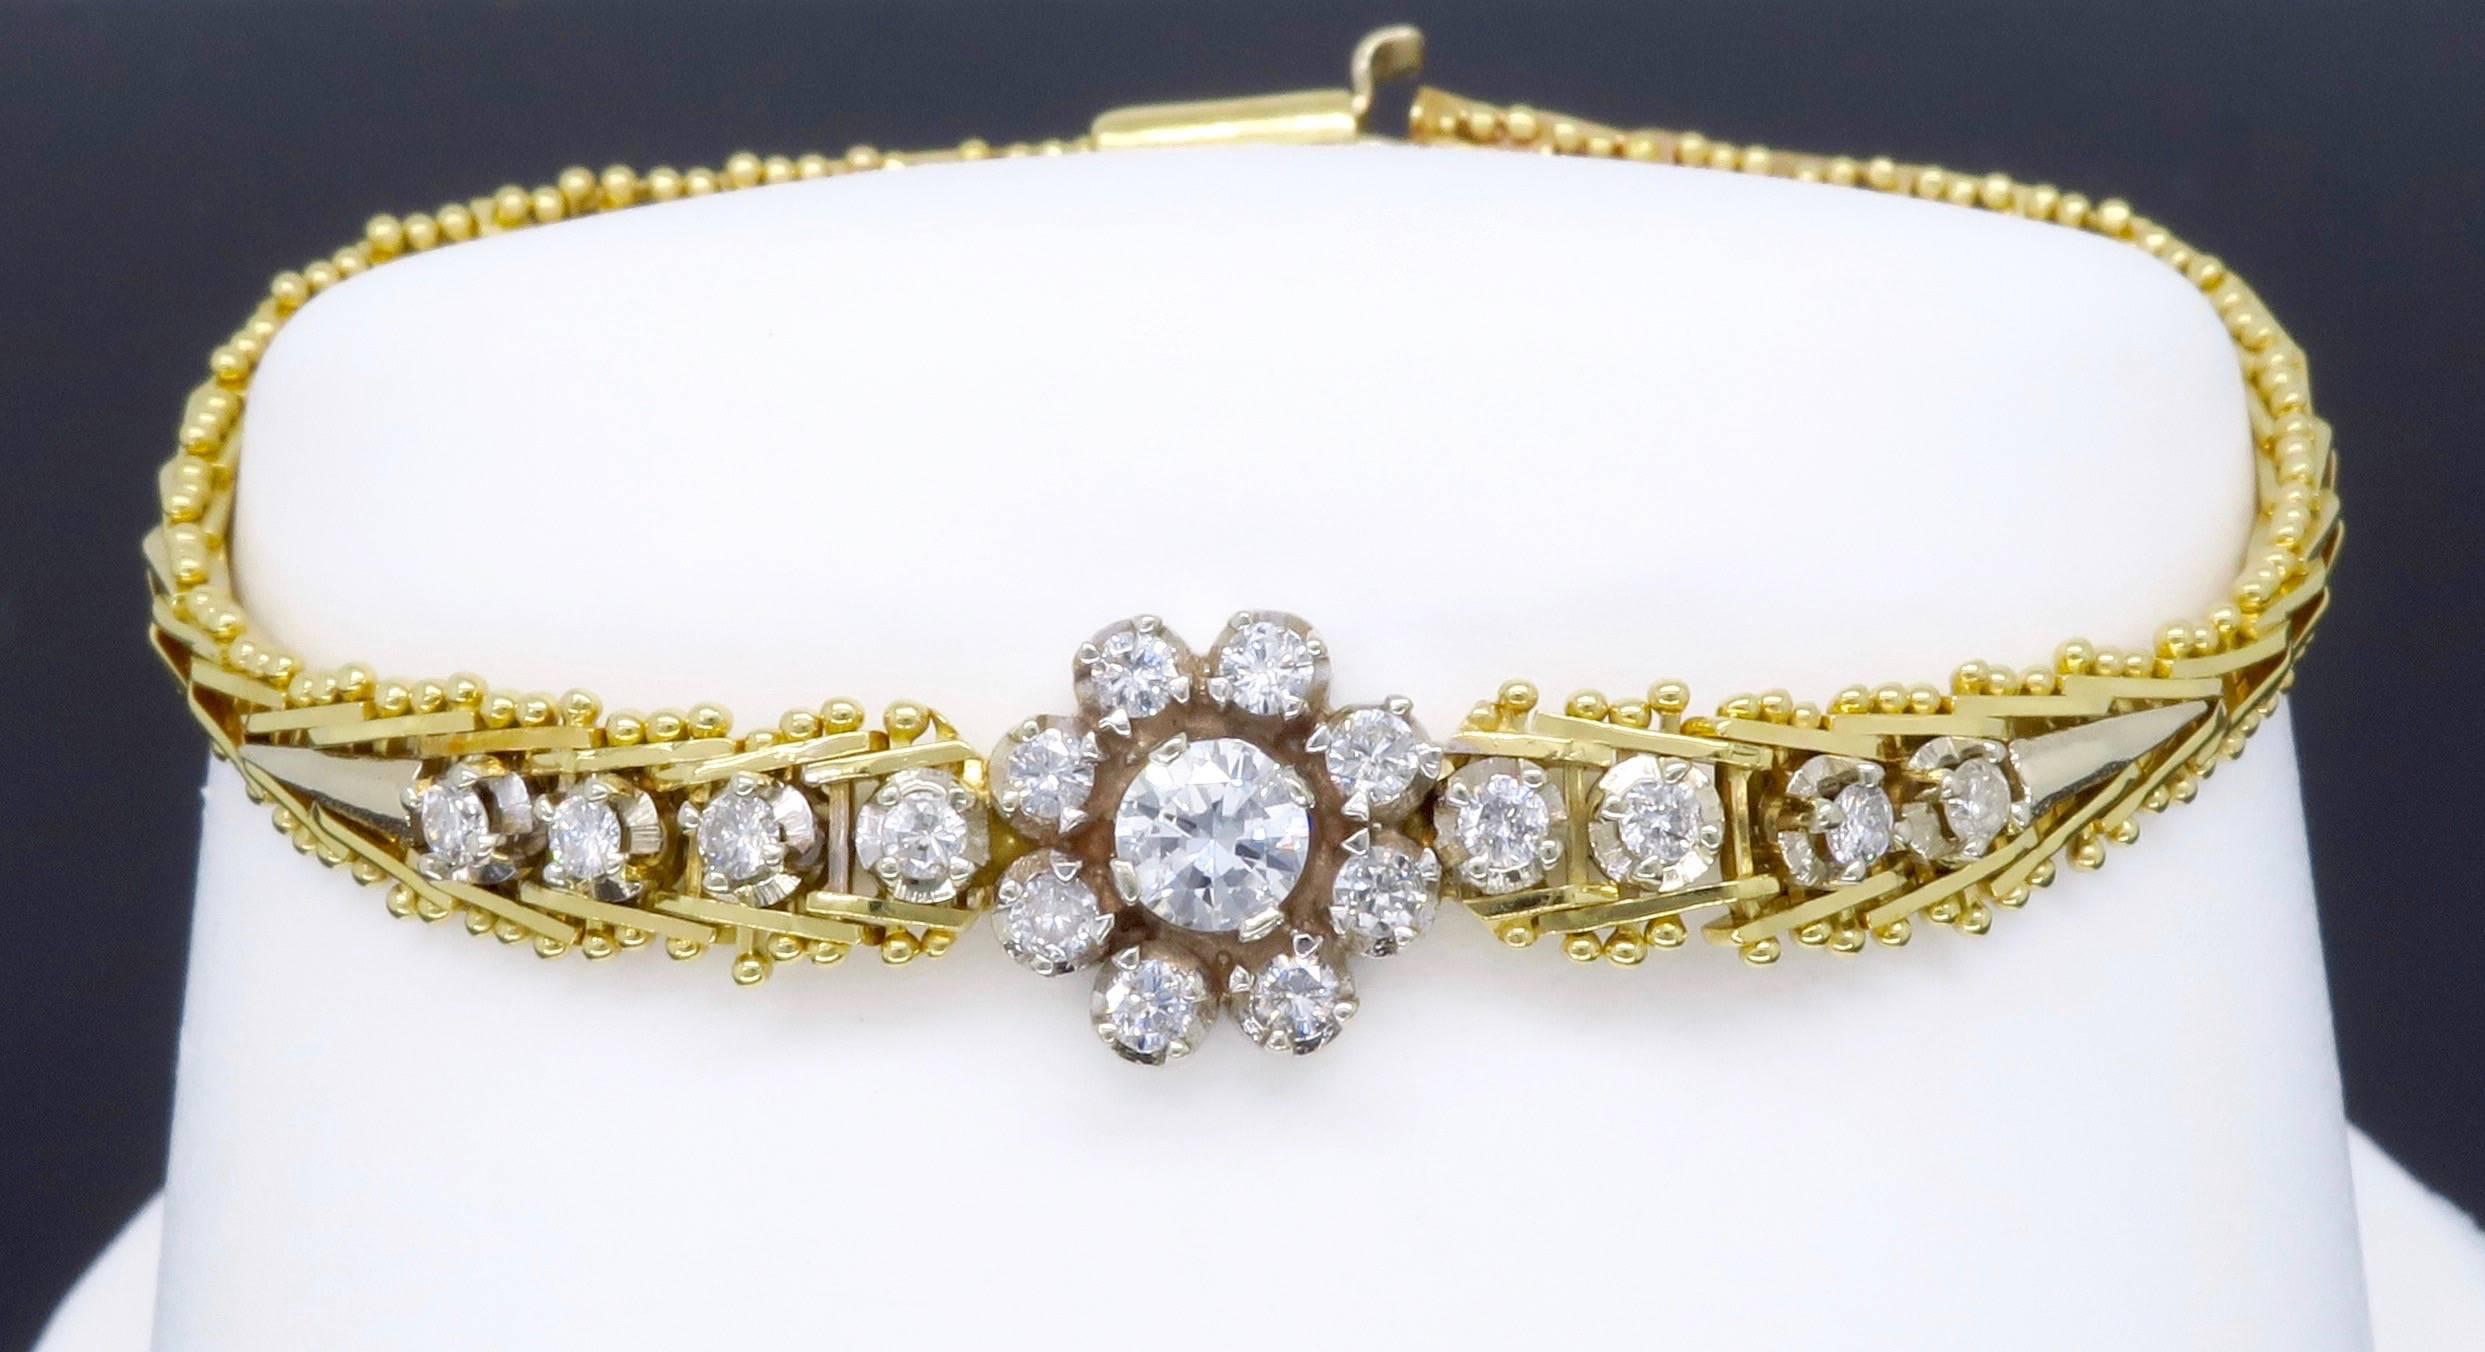 This dainty 14K gold bracelet features a .25CT Round Brilliant Cut Diamond. The featured diamond is set in a pretty floral design made up of 16 additional Round Brilliant Cut Diamonds. The beautiful featured diamond displays SI1 clarity and G-H